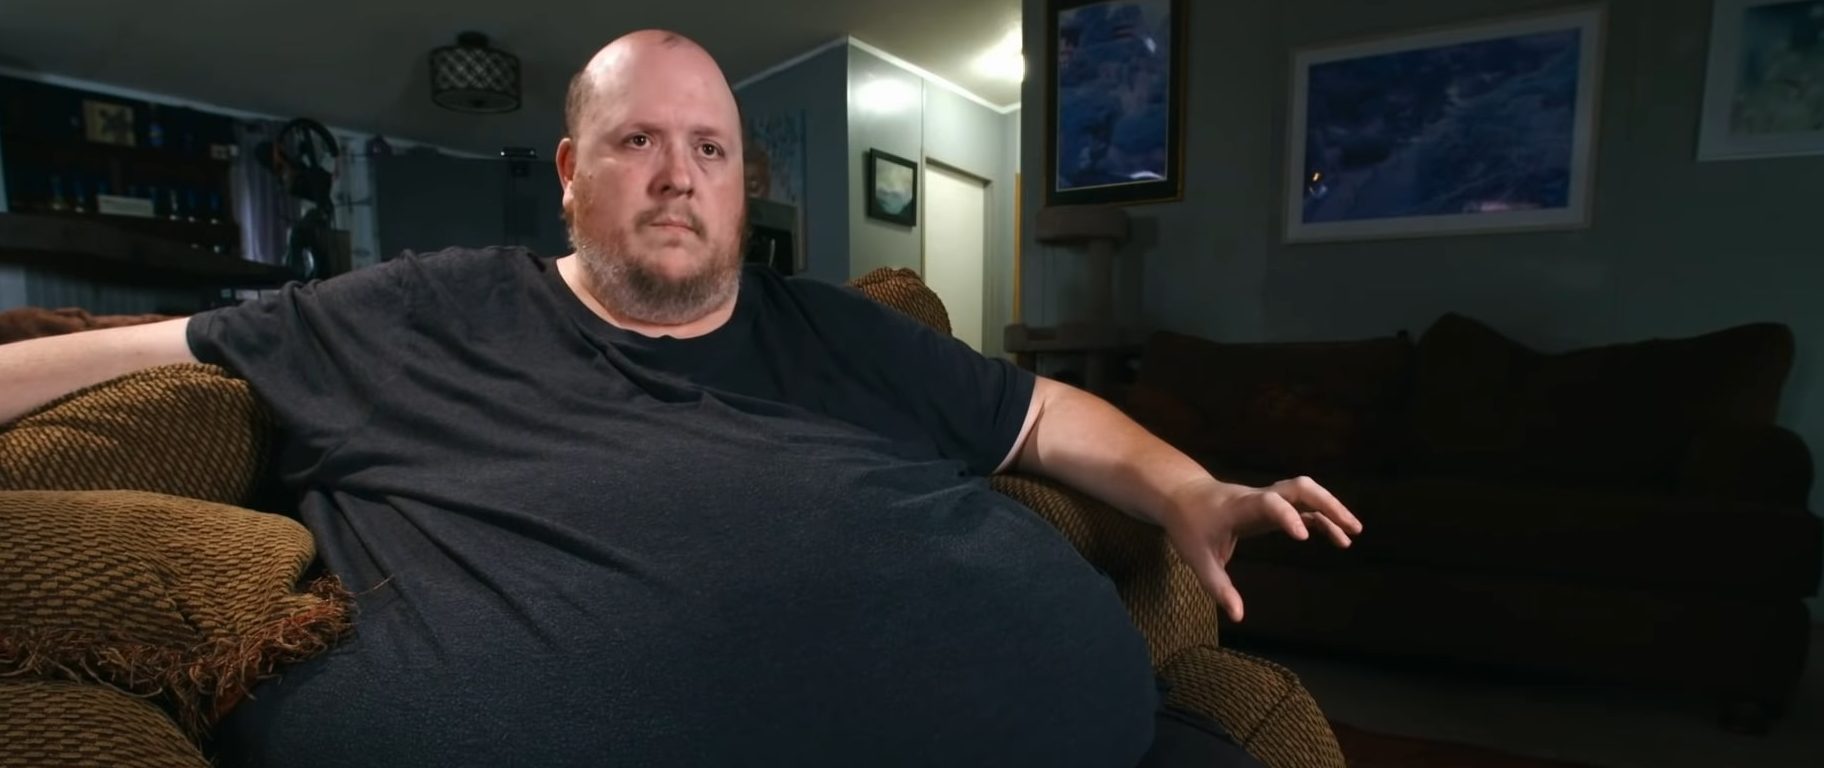 Michael Blair My 600-lb Life Update: Where is He Today?